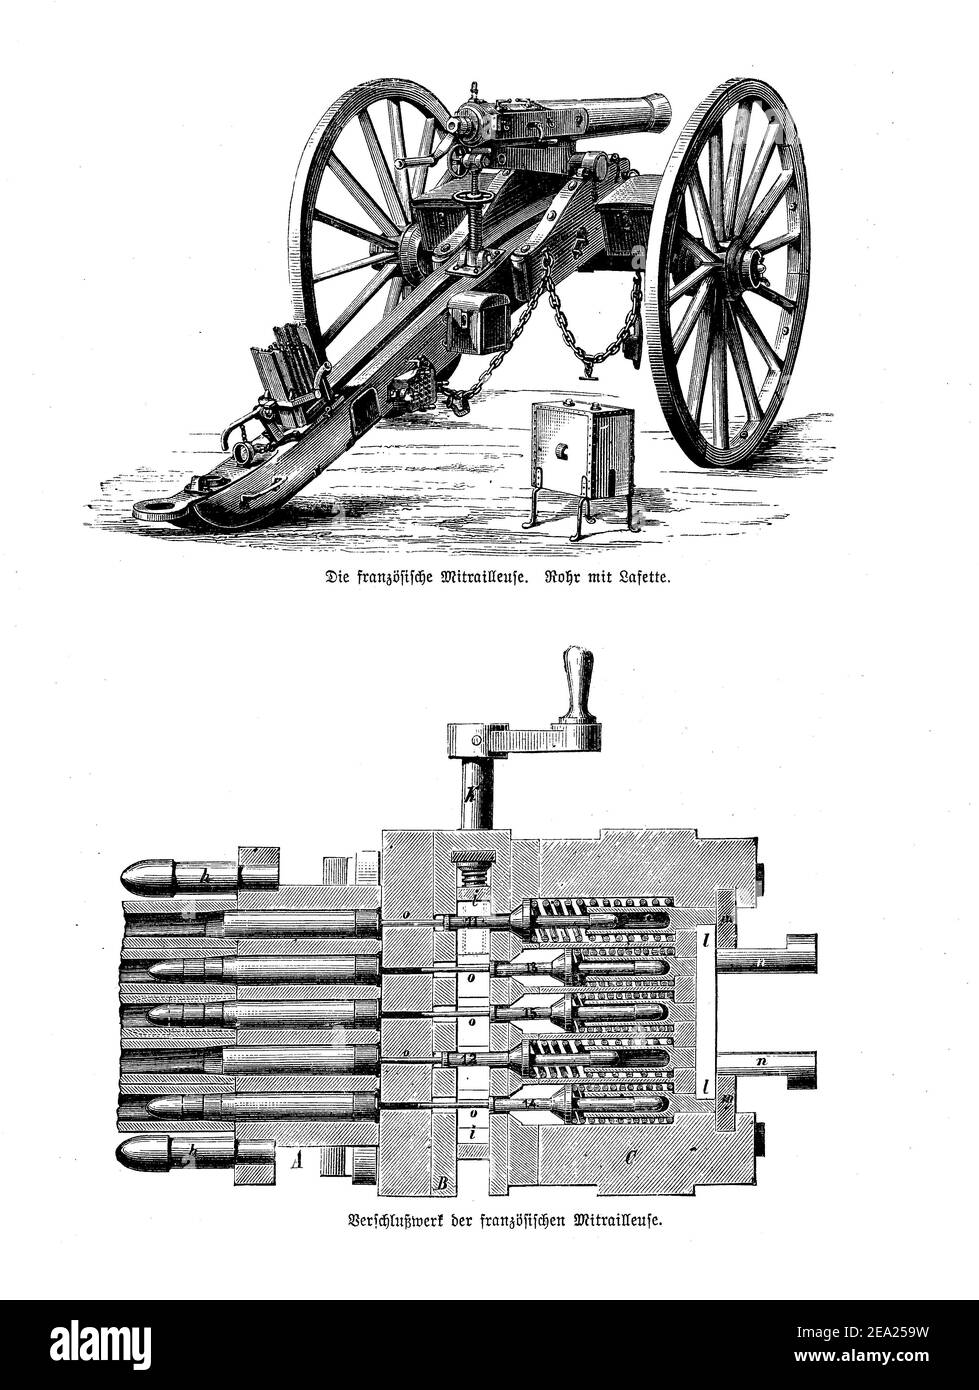 French mitrailleuse, machine gun mounted on chassis lafette, with detail of cartridge magazine and loading mechanism, end of 19th century Stock Photo